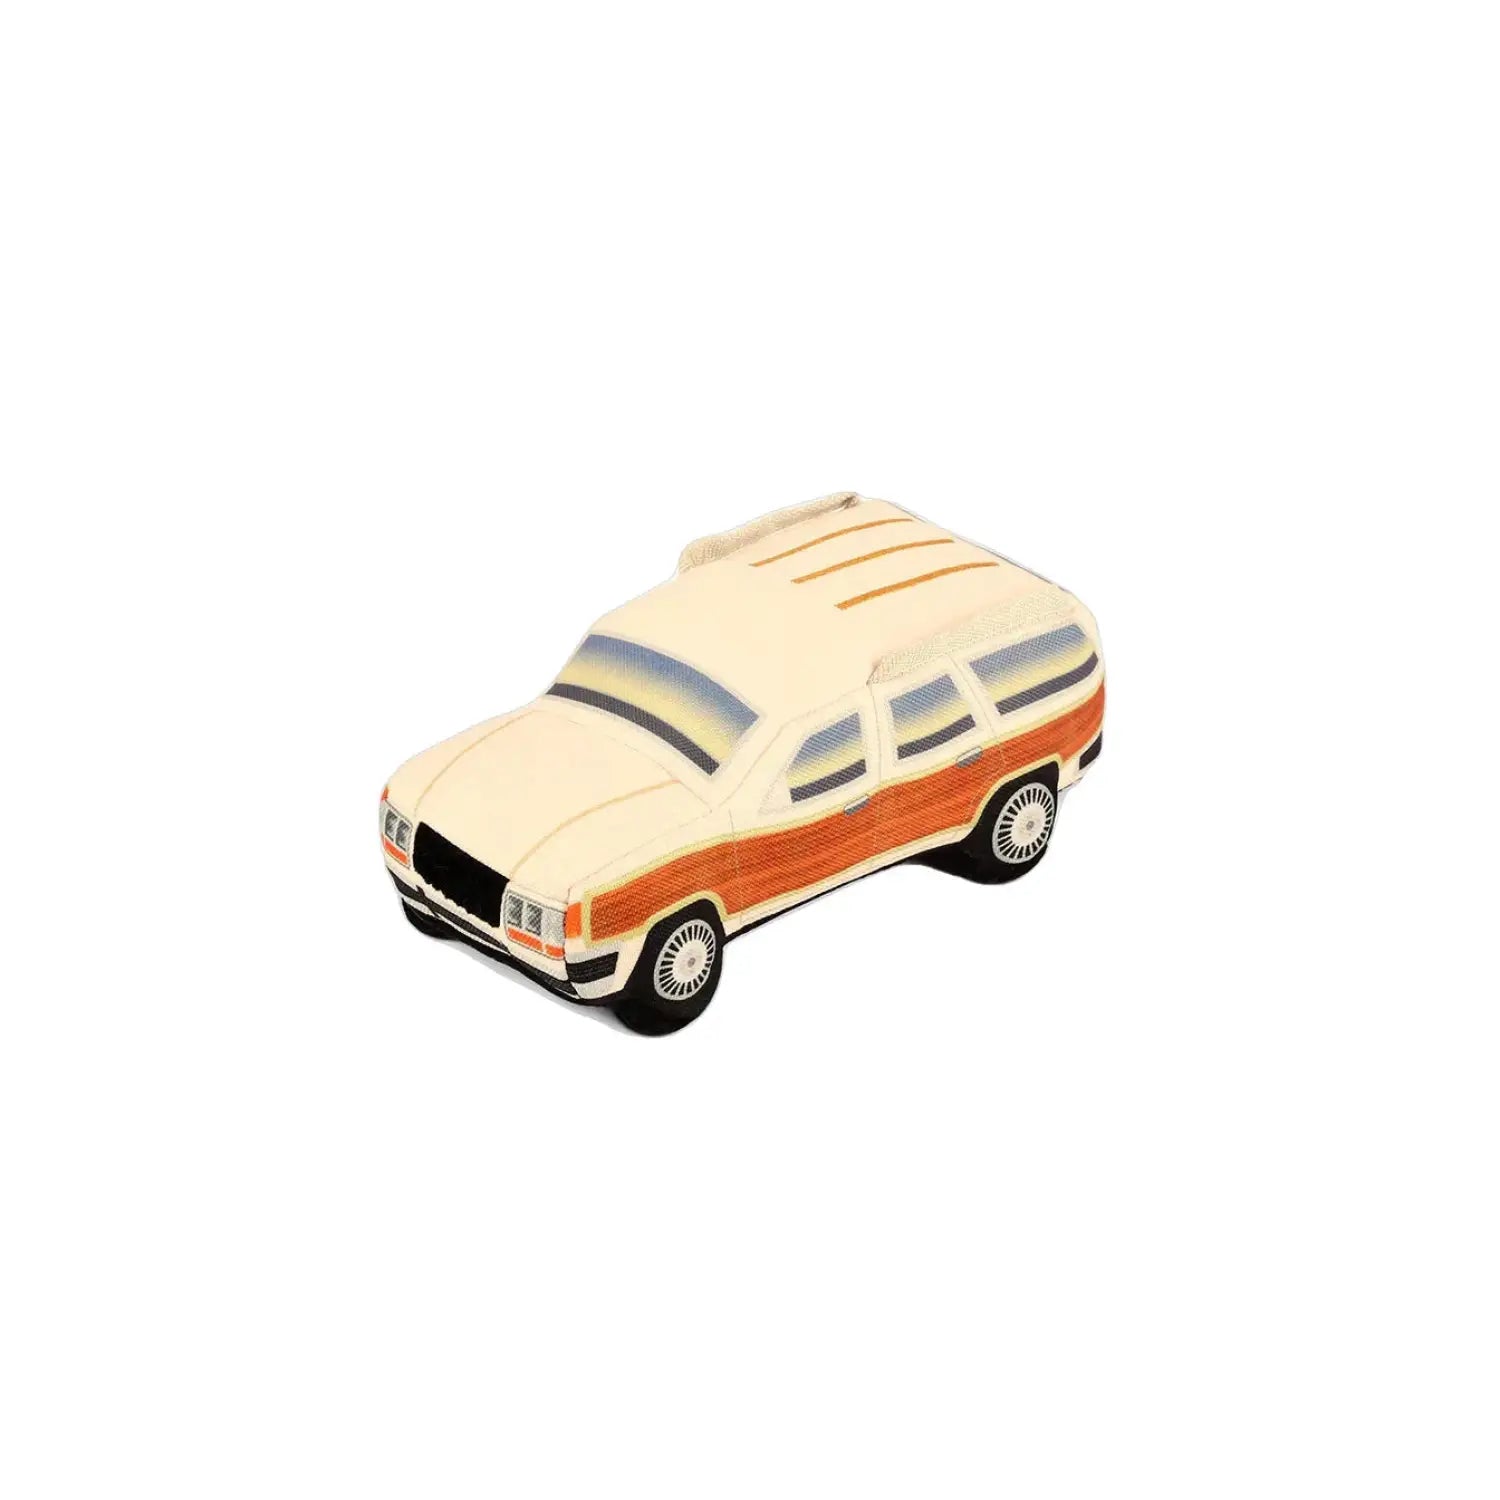 P.L.A.Y. 80's Classics Collection - Scruffy's Station Waggin'. Station wagon Dog Toy.